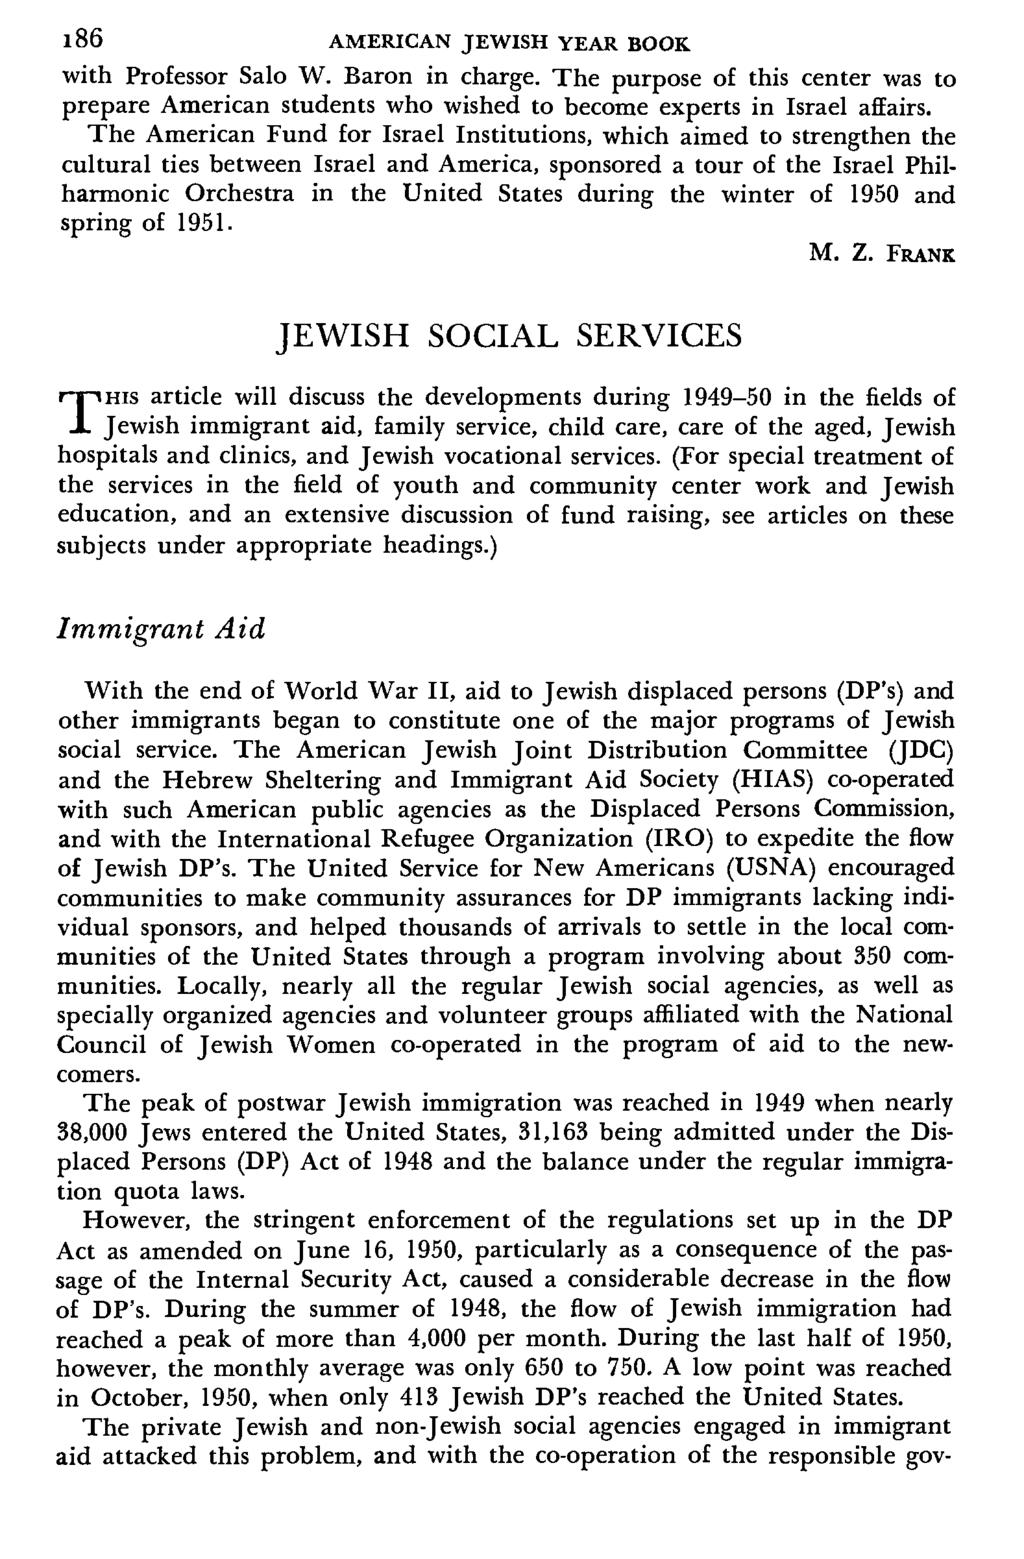 l86 AMERICAN JEWISH YEAR BOOK with Professor Salo W. Baron in charge. The purpose of this center was to prepare American students who wished to become experts in Israel affairs.